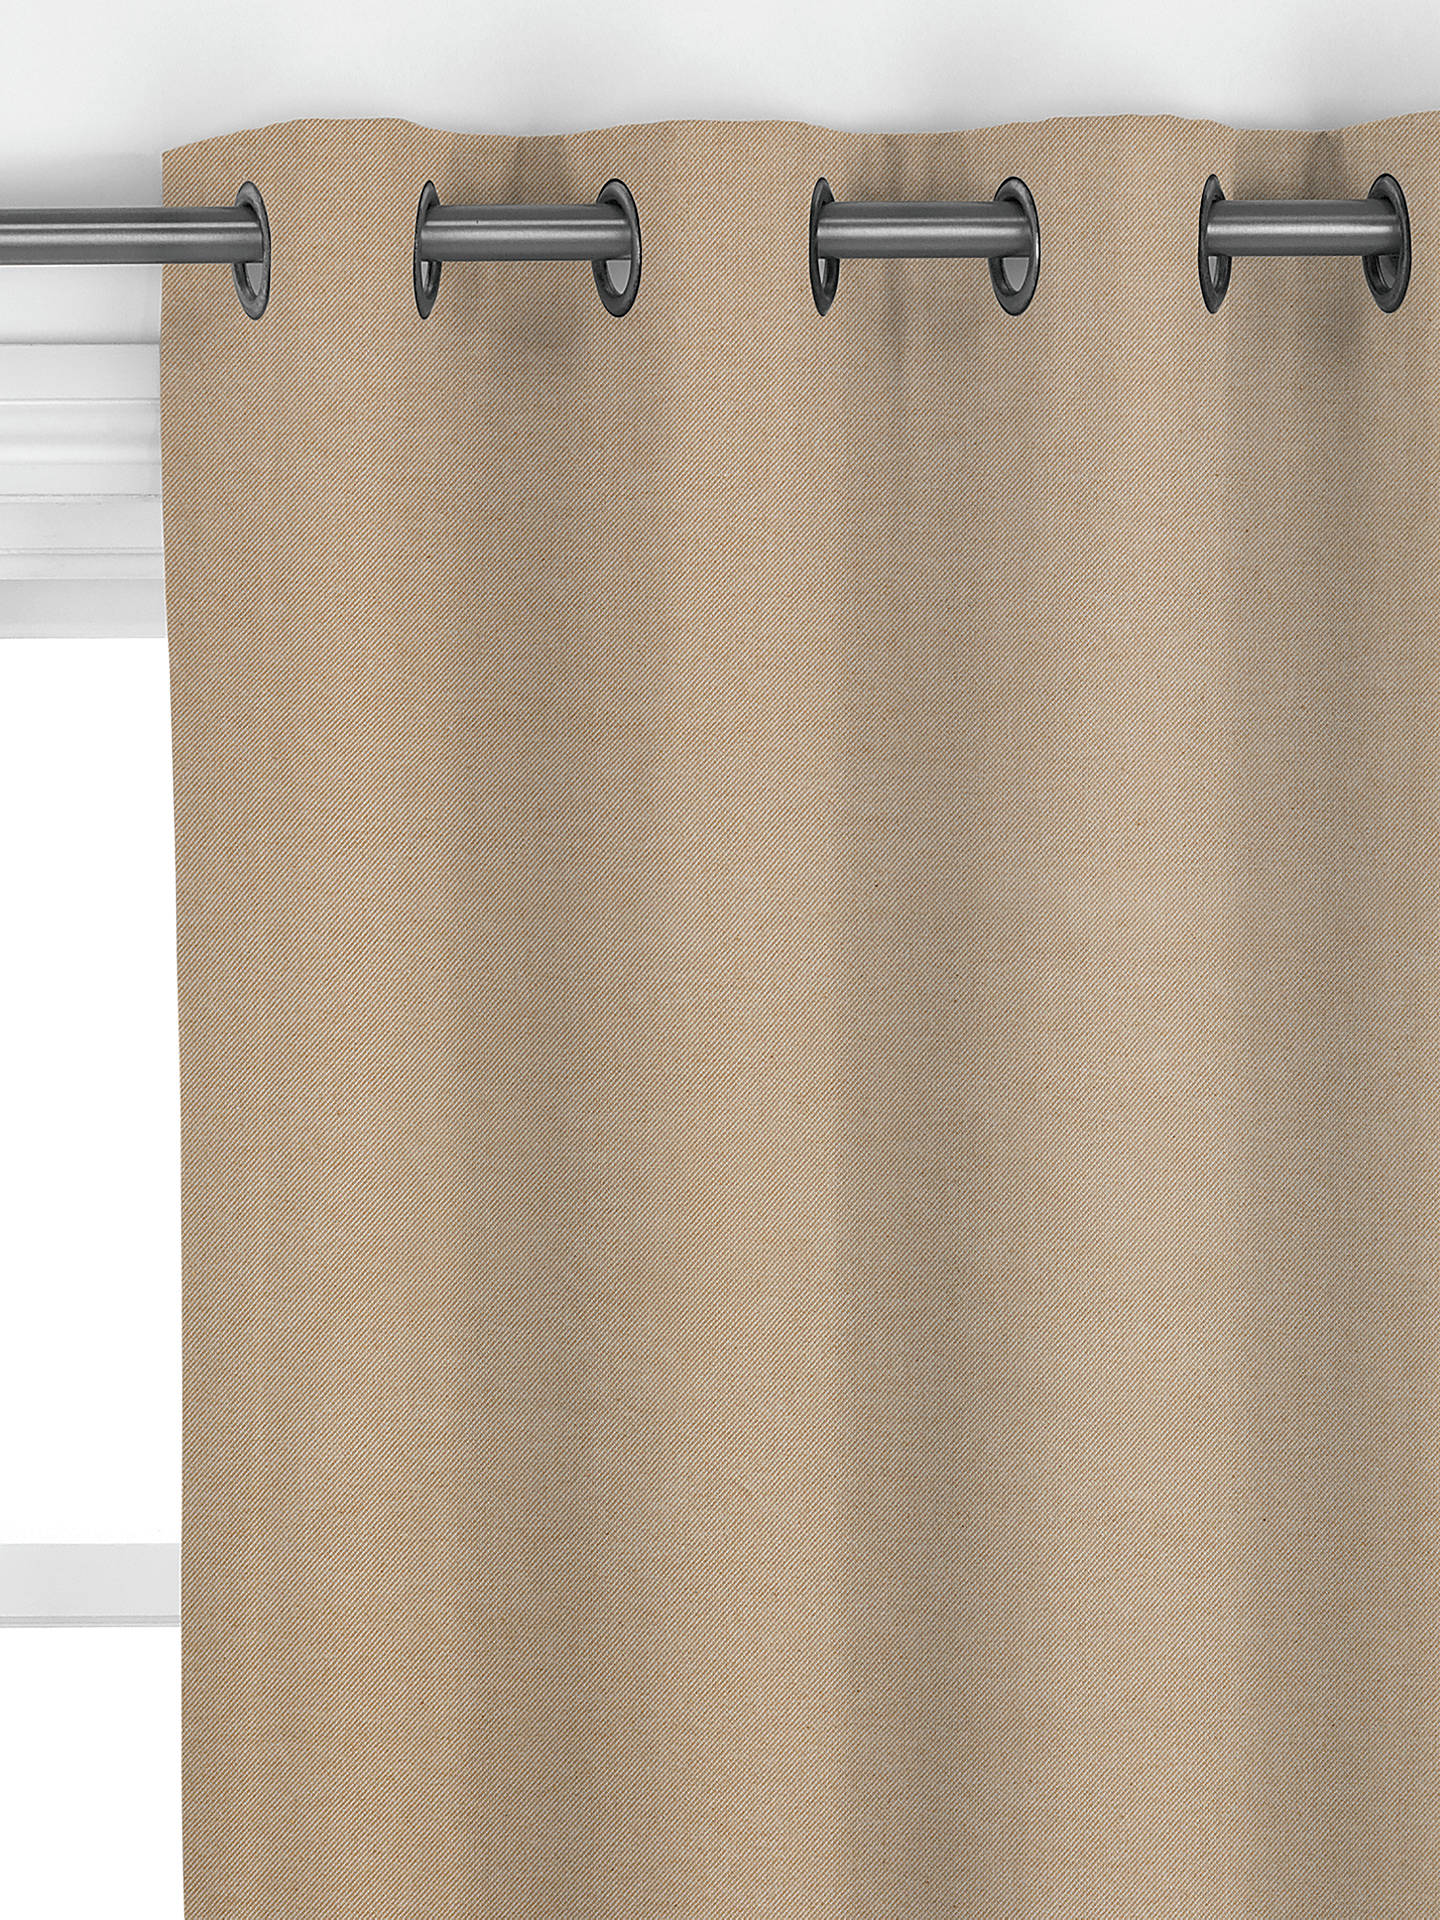 John Lewis Cotton Twill Made to Measure Curtains, Natural